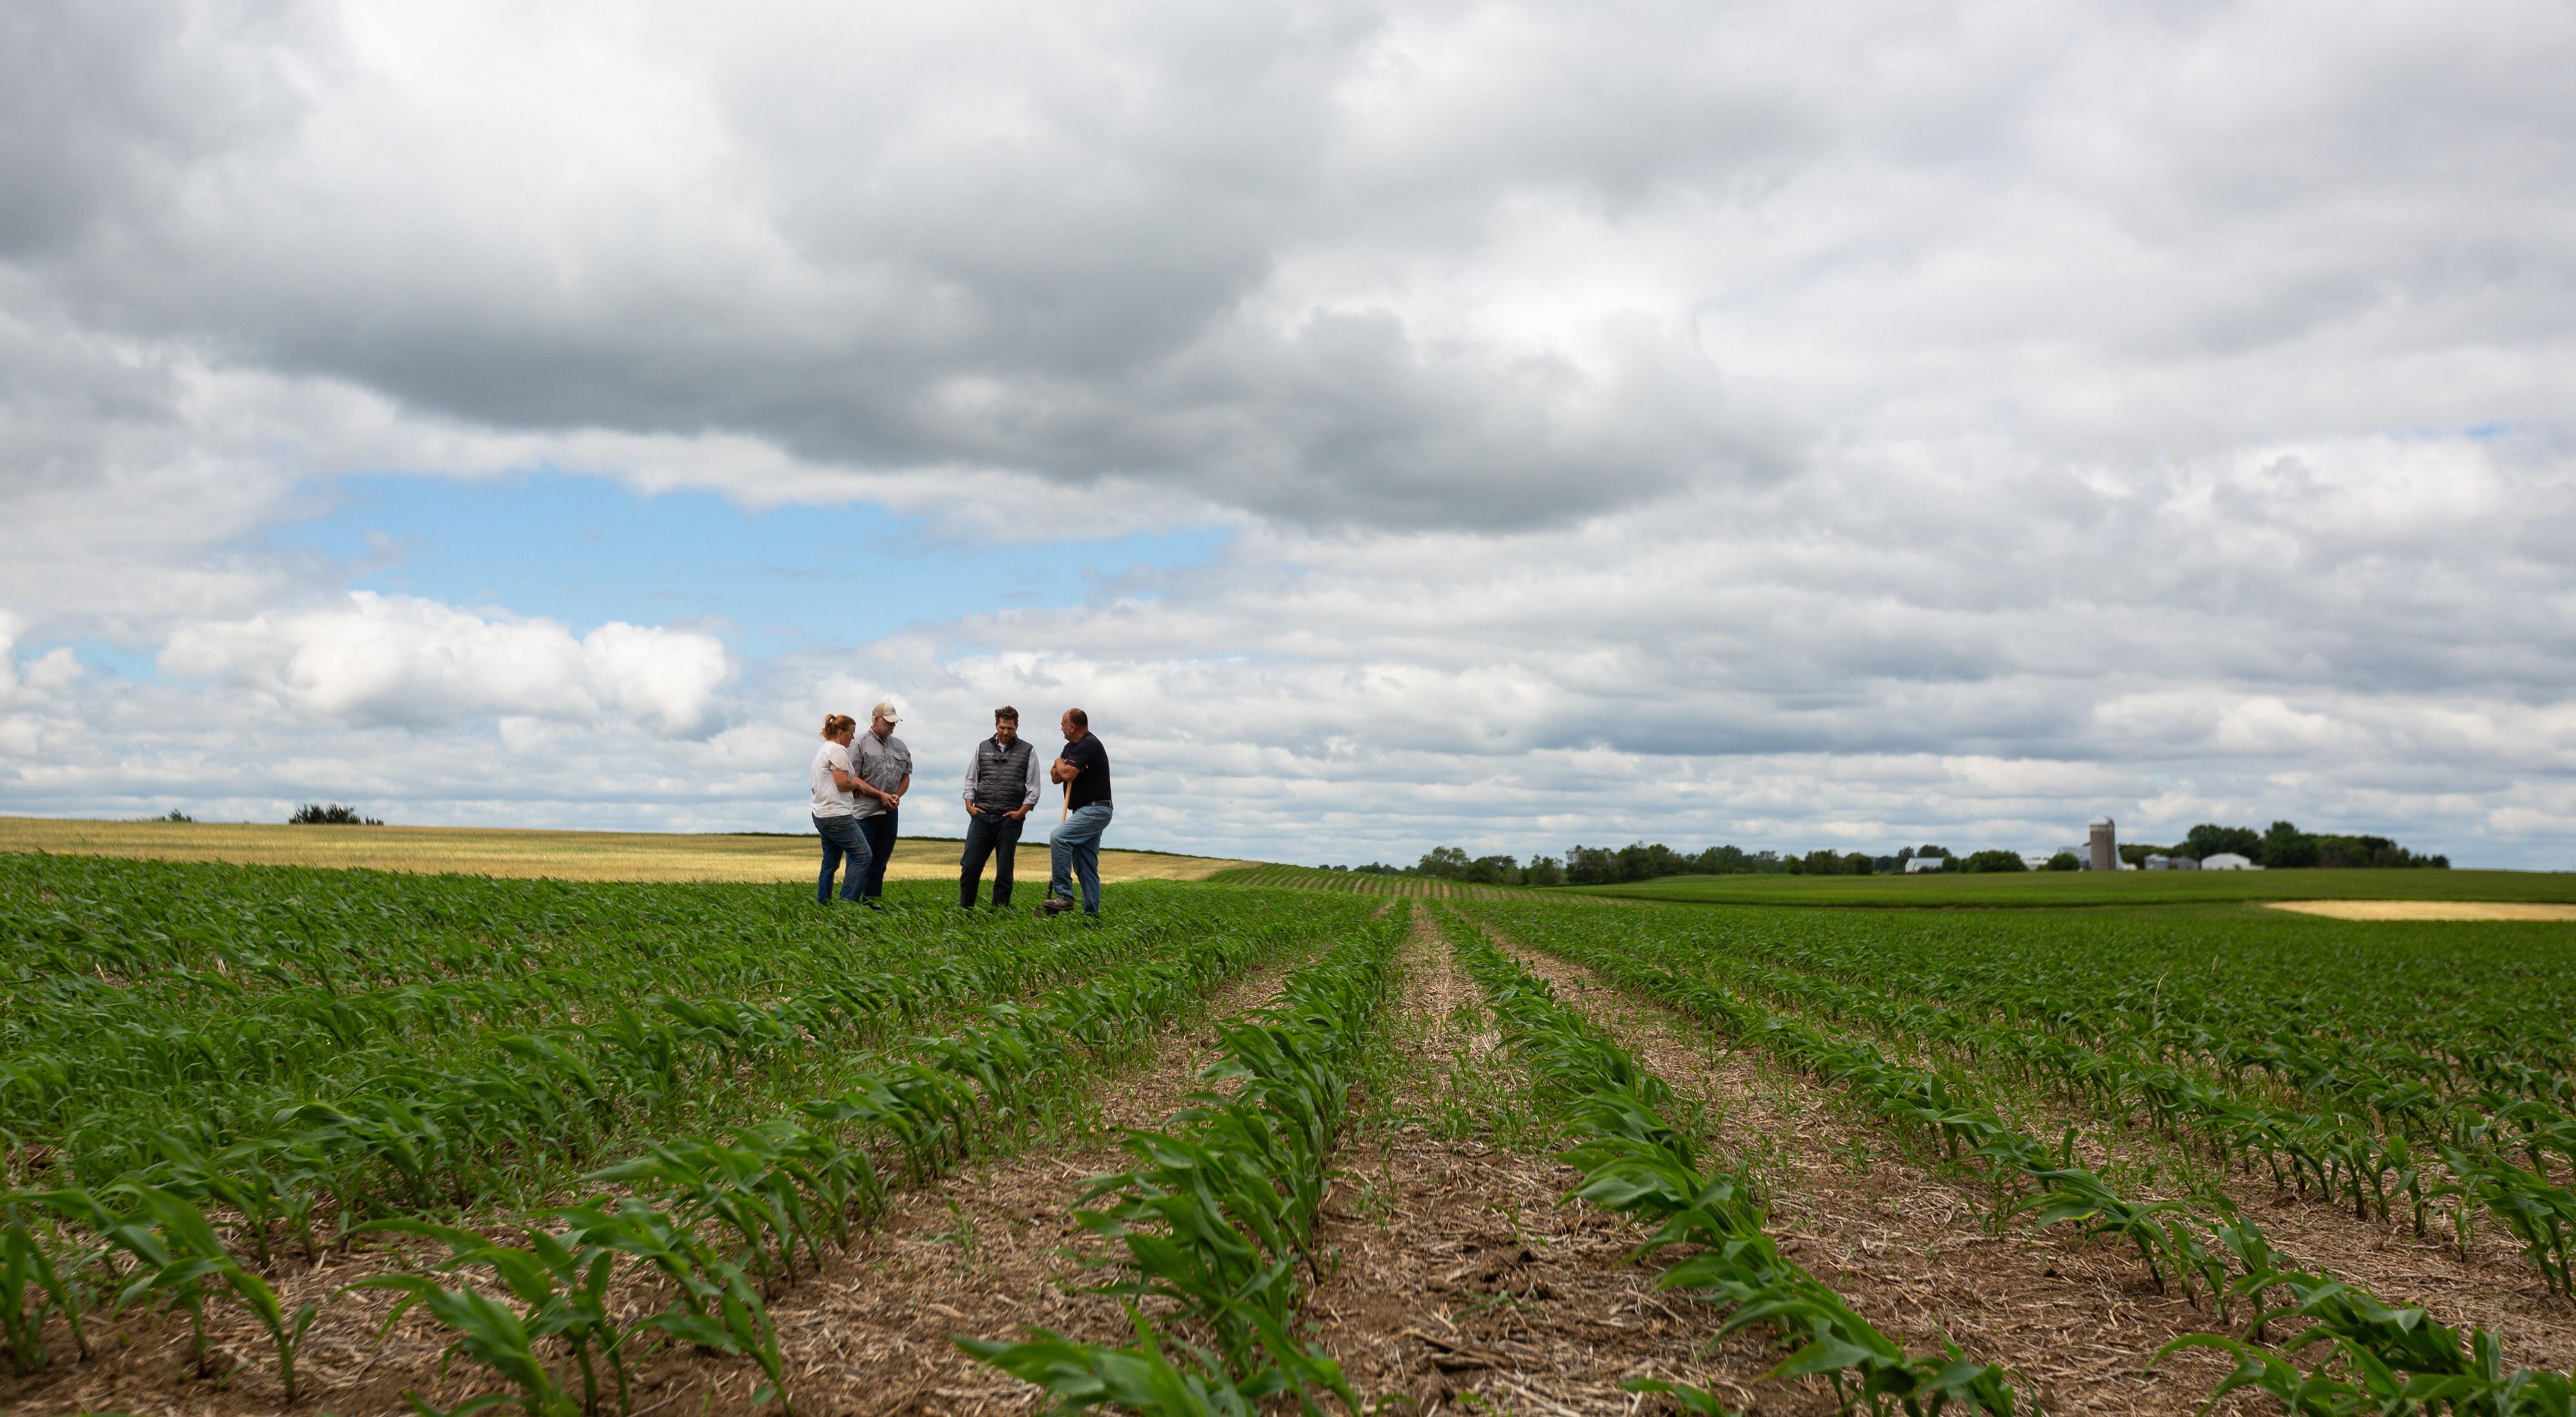 Conservation partners standing in a no-till farm field in Stearns County, Minnesota.